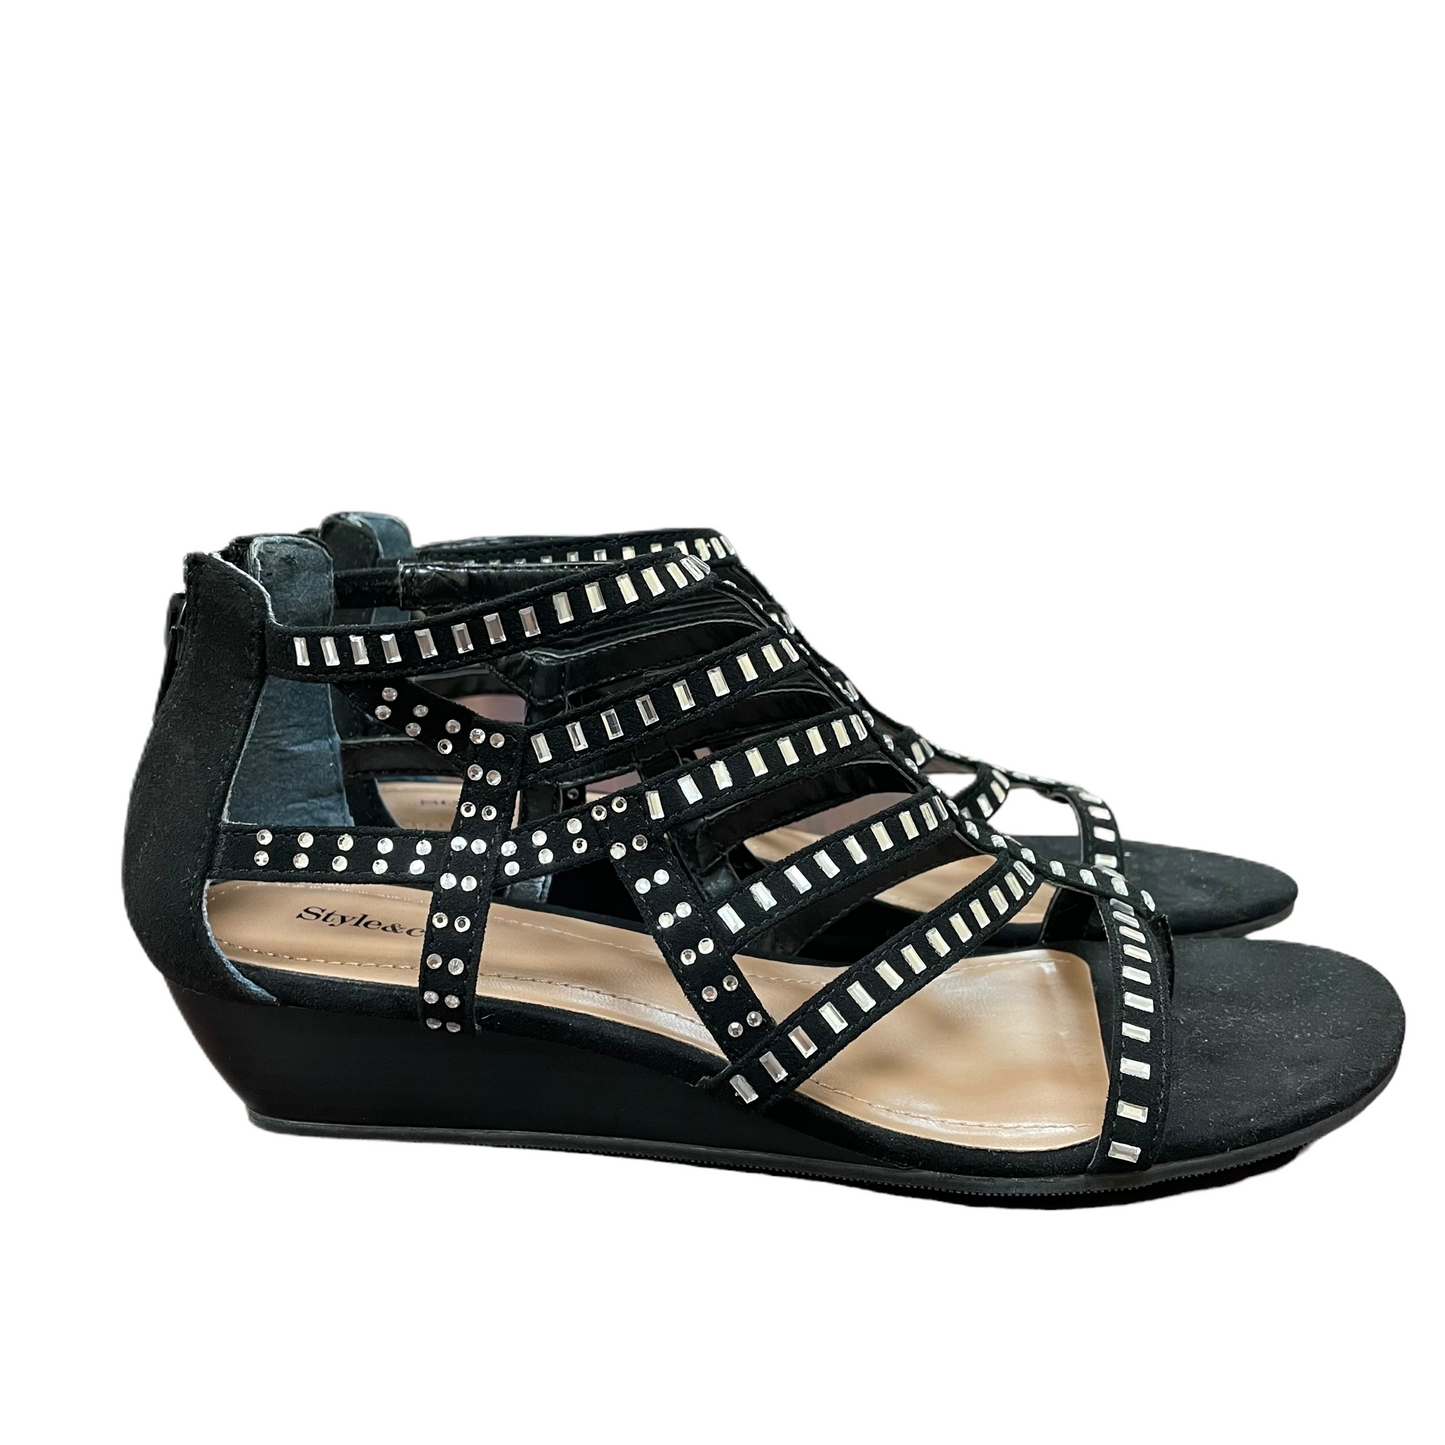 Black Sandals Heels Wedge By Style And Company, Size: 6.5